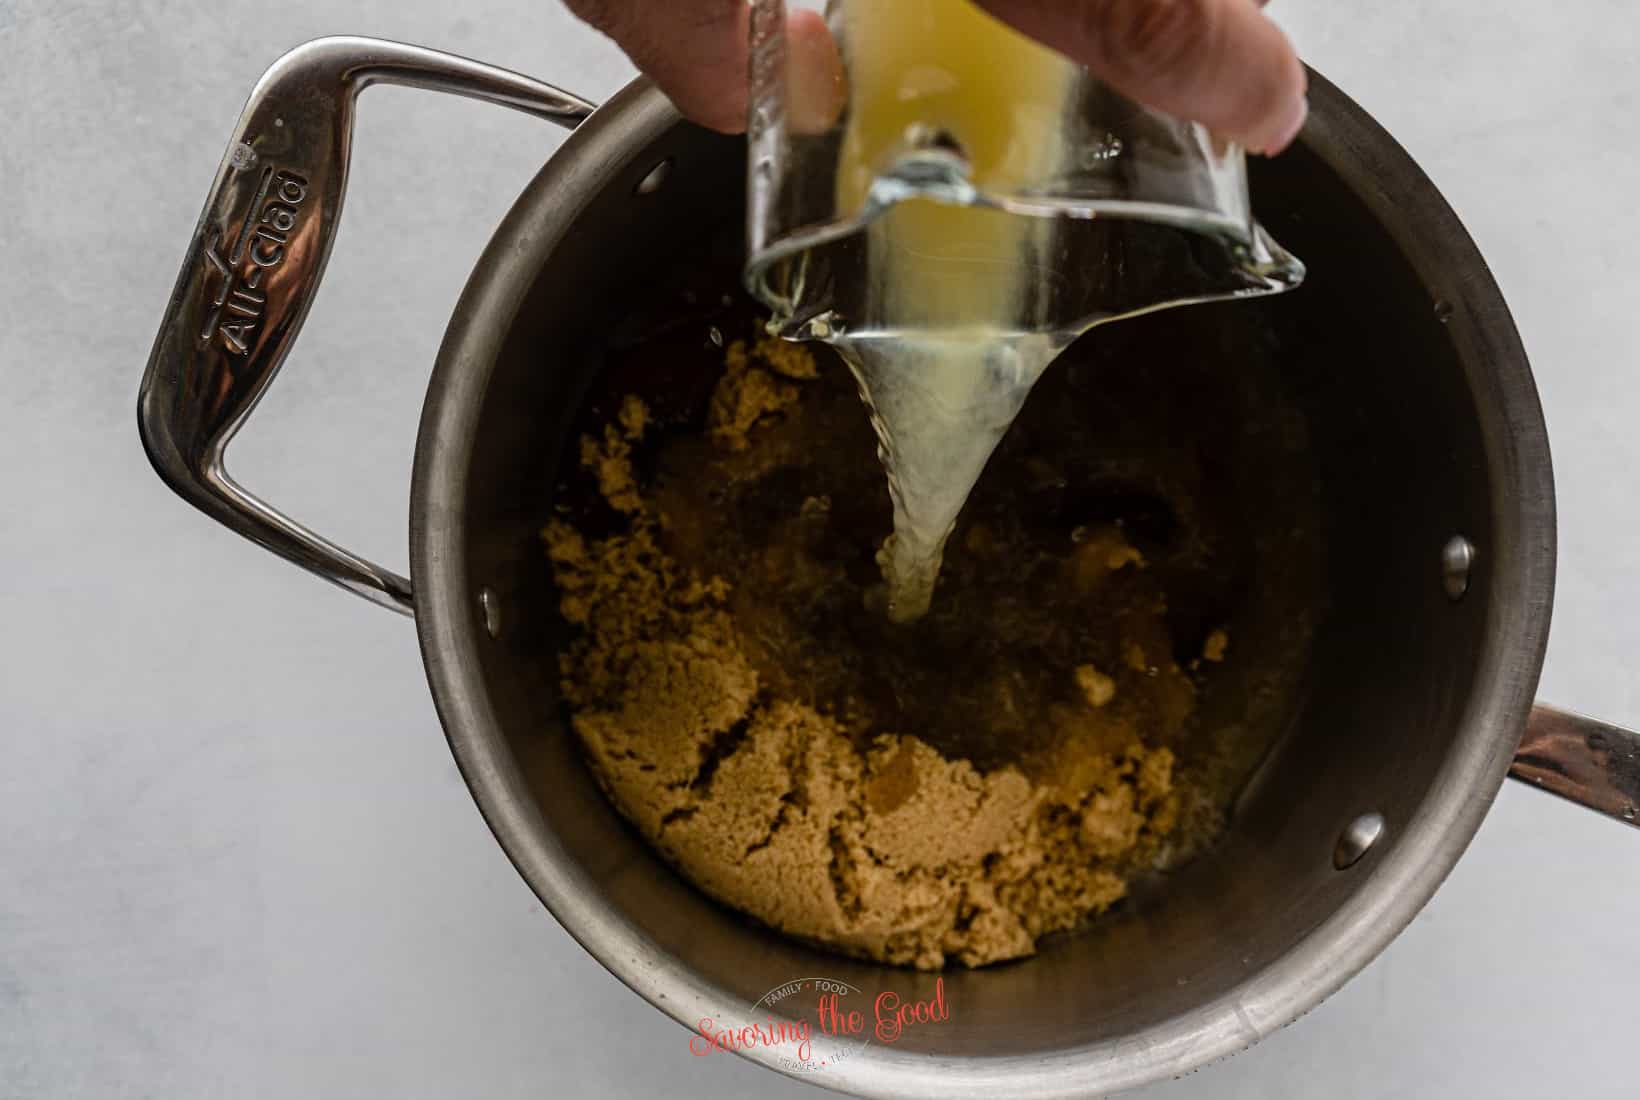 pineapple juice being added to the brown sugar glaze.